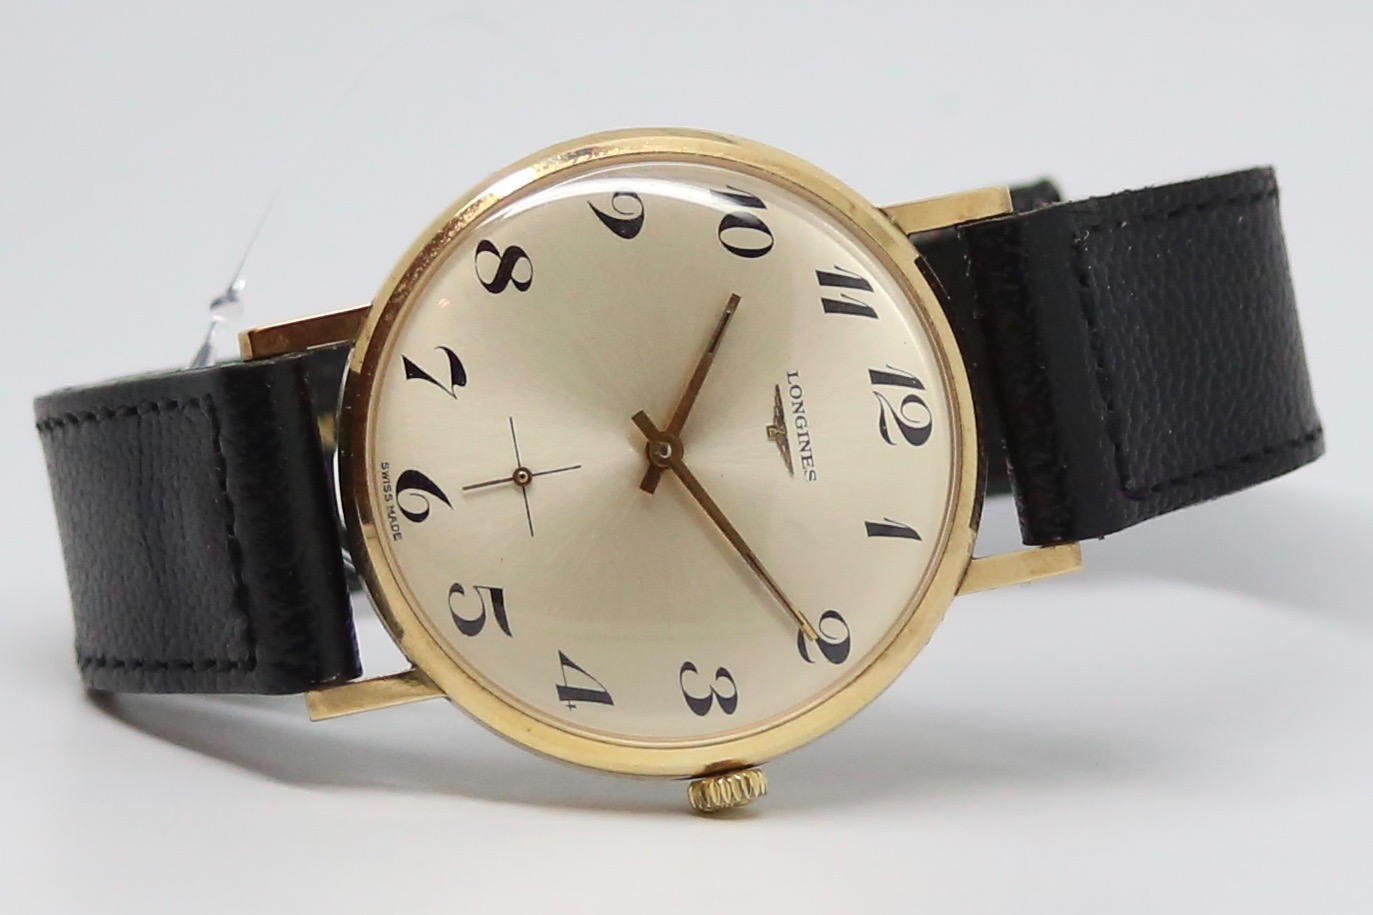 Gentleman's Longines Gold Vintage Wristwatch, circular dial with interesting arabic numerals with